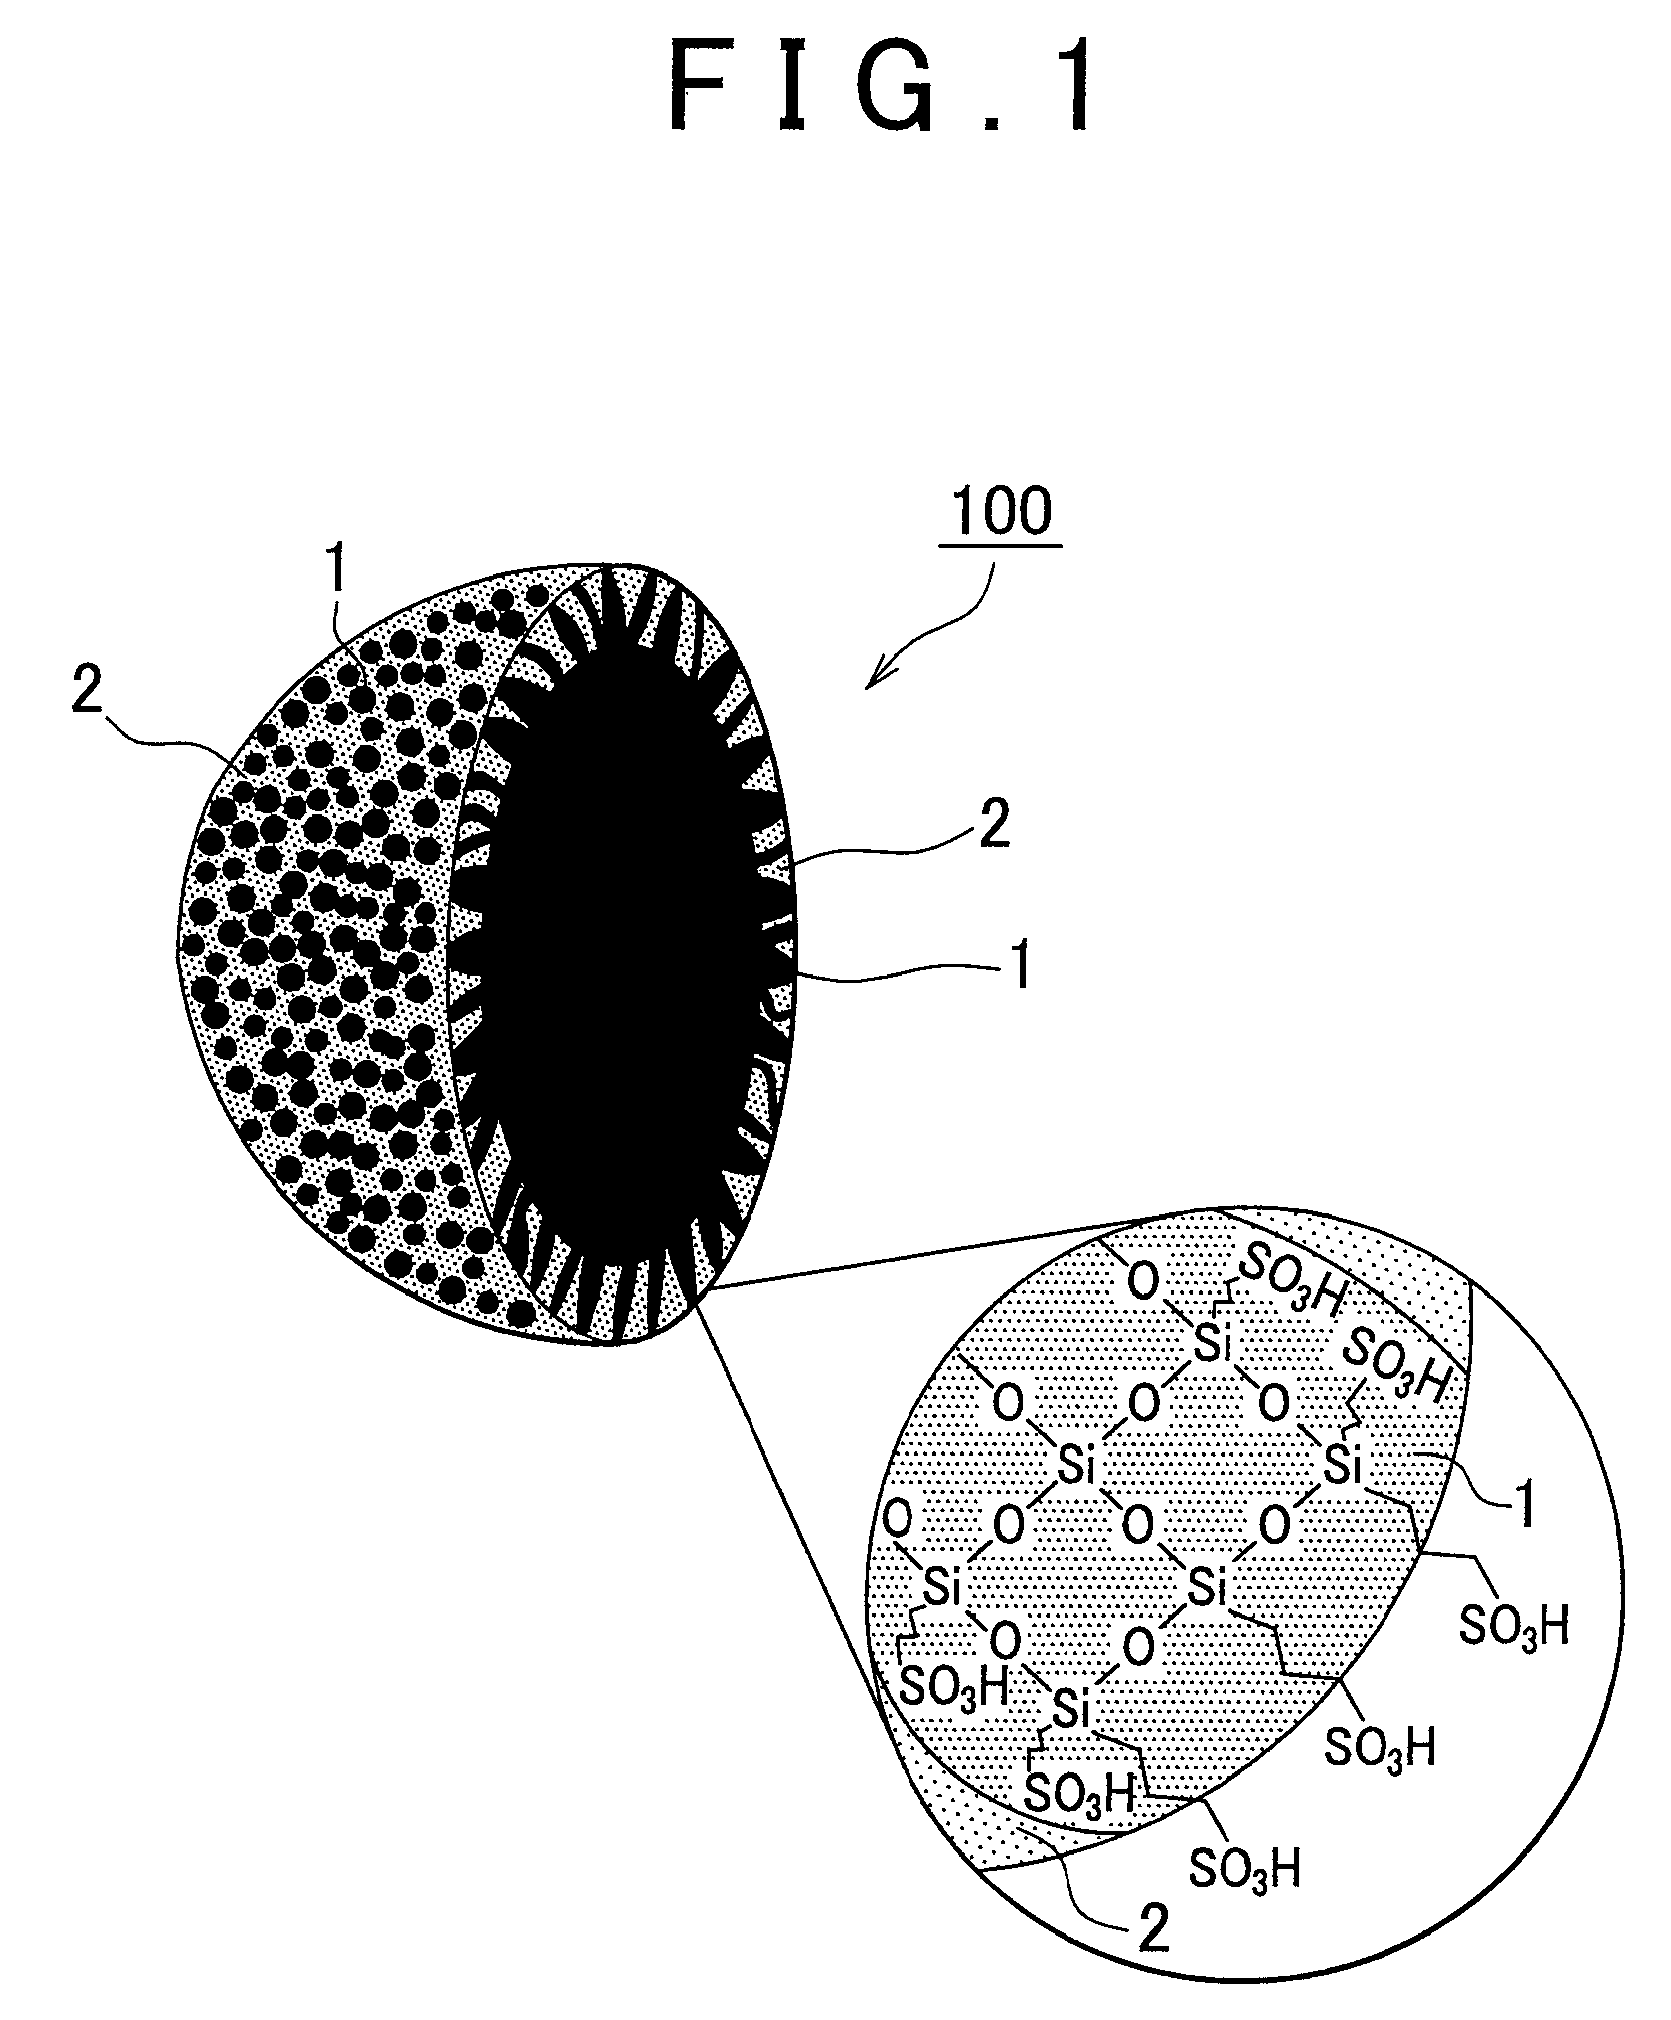 Electrolyte membrane for fuel cell having hollow inorganic fine particles